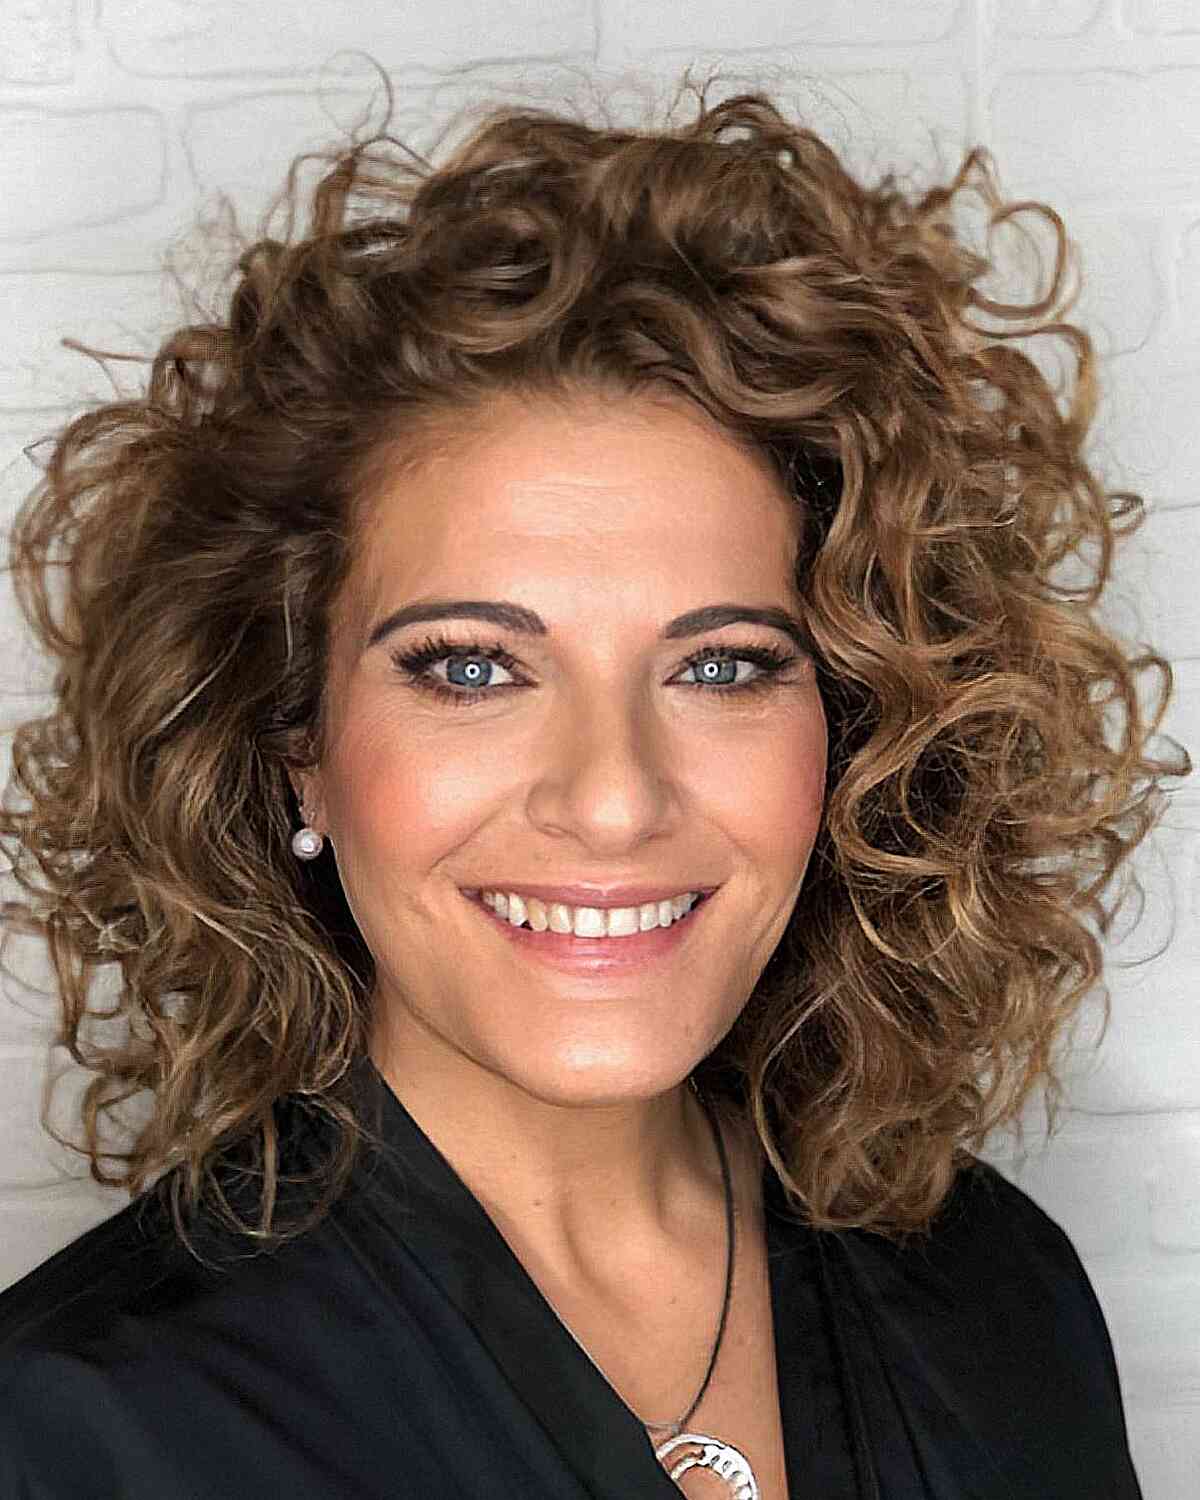 Super Soft Curly Hair for Ladies in Their 40s